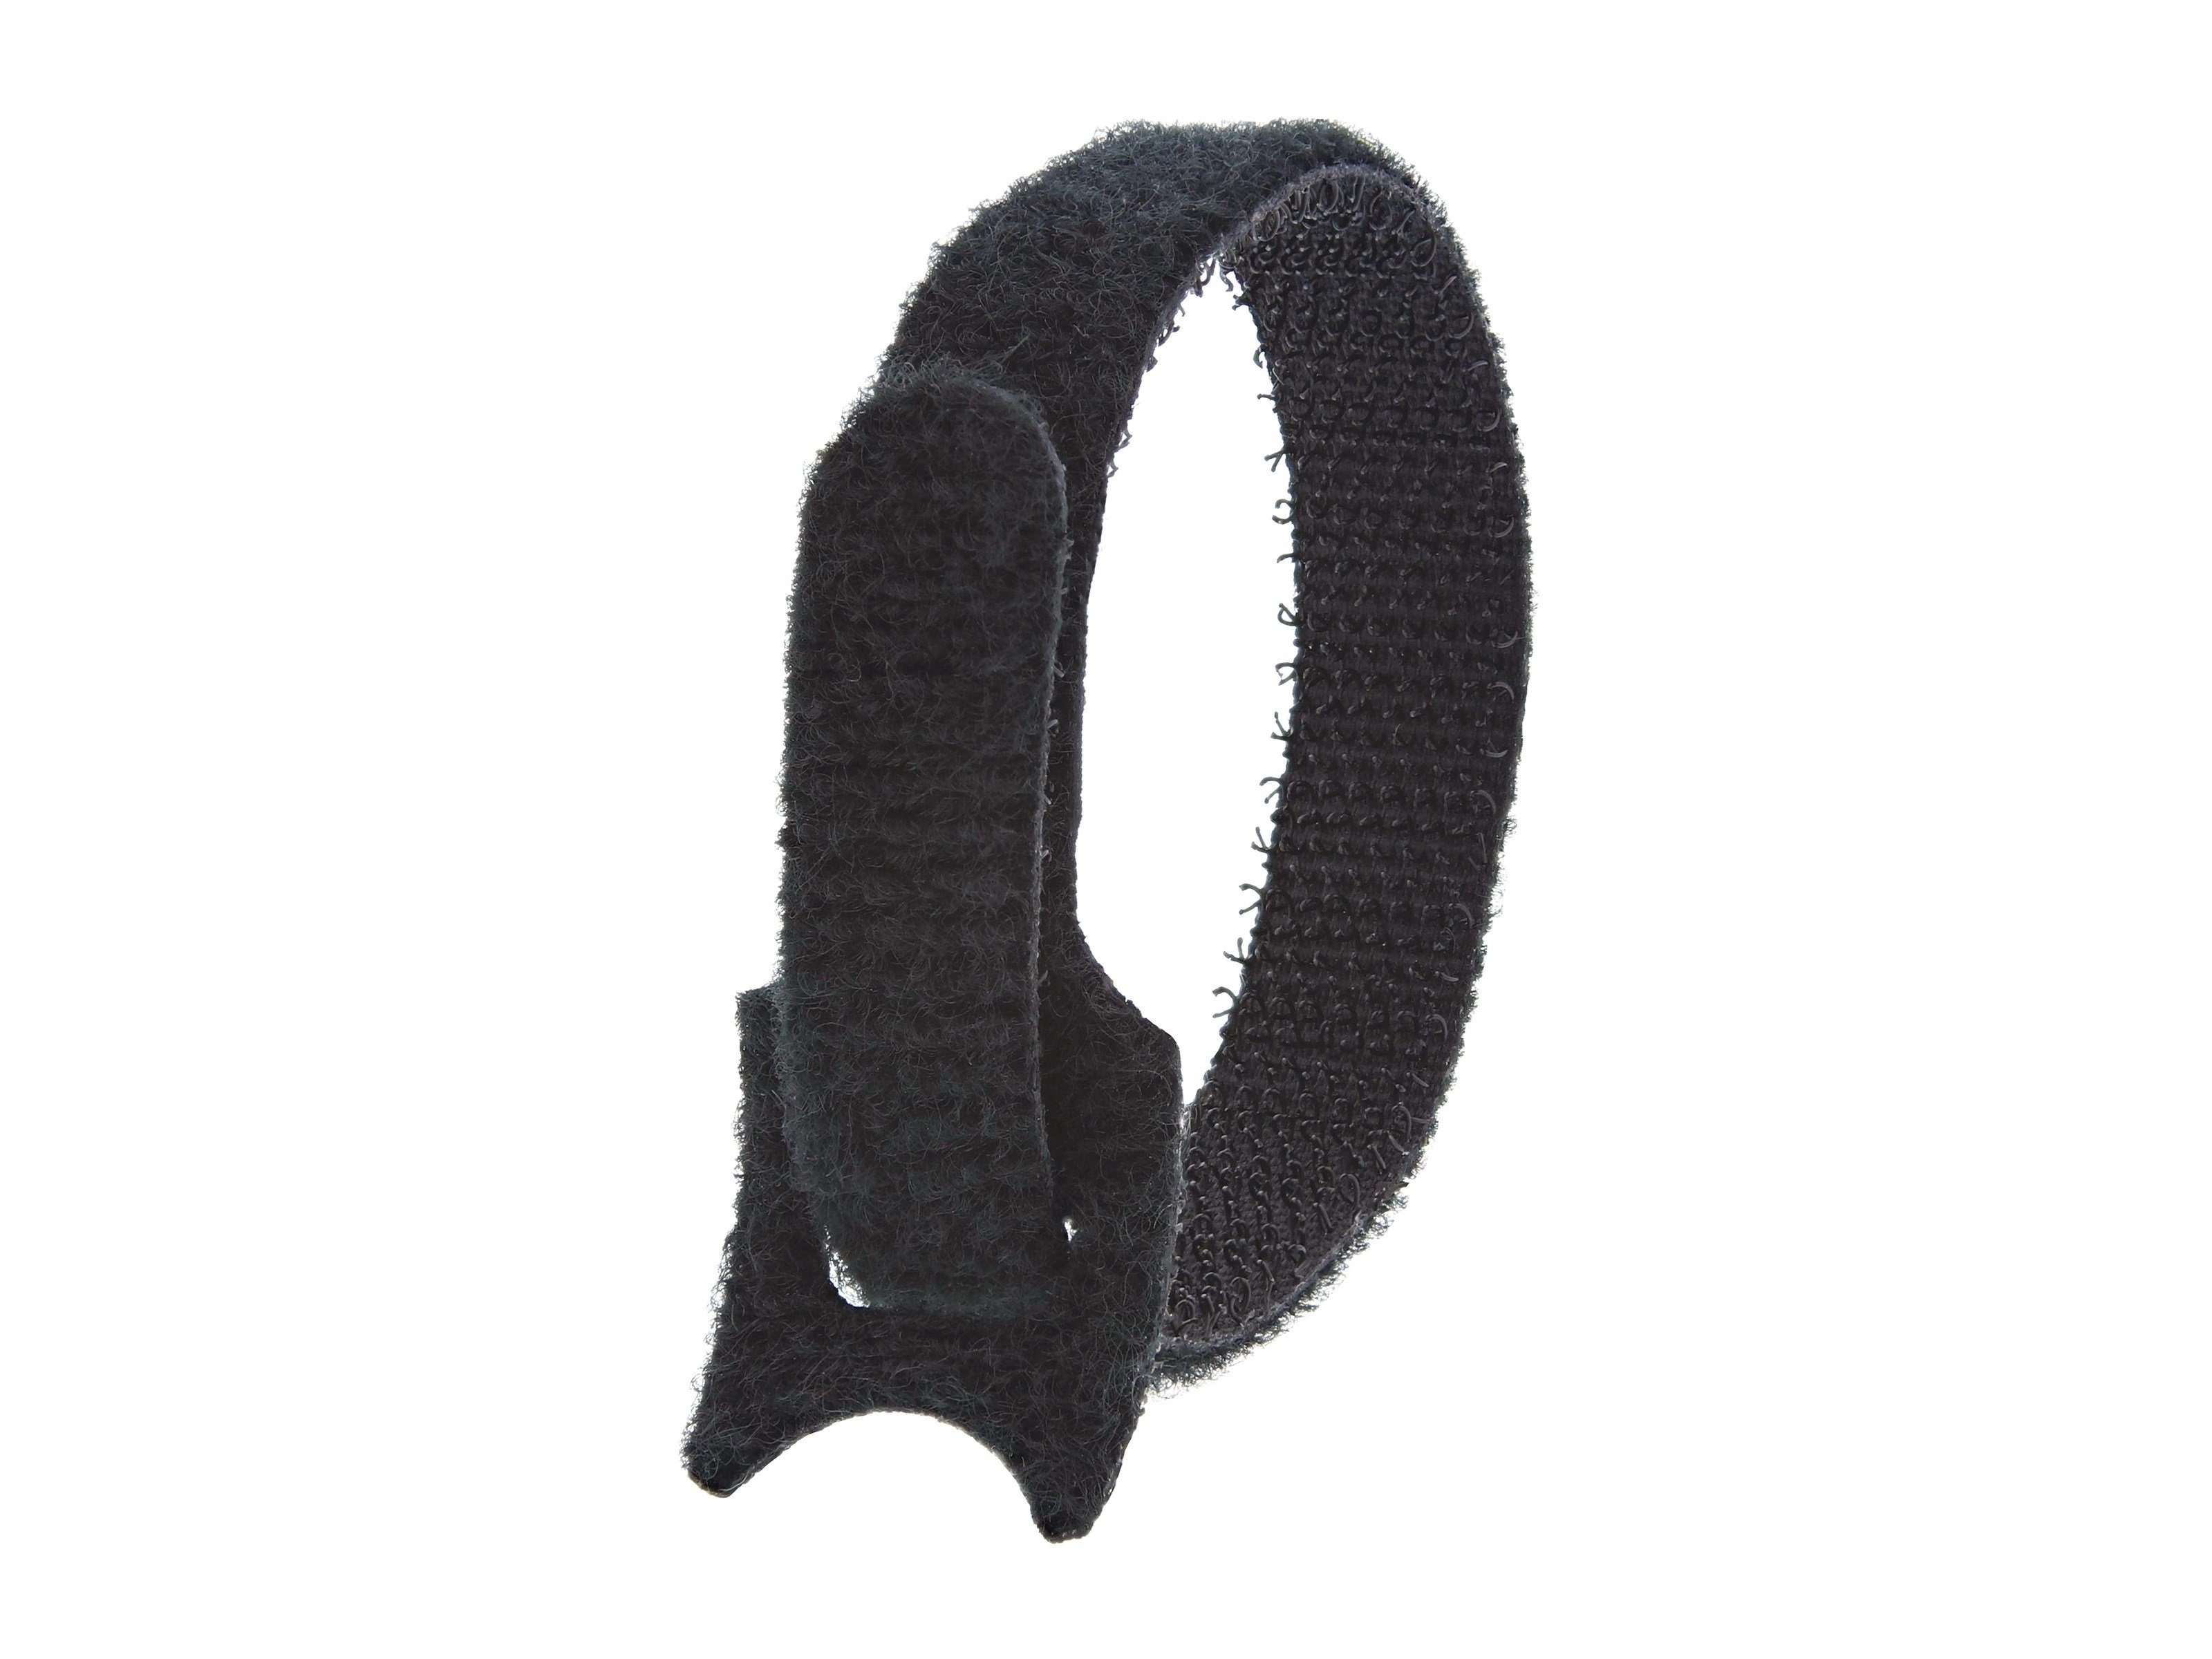 VELCRO Brand 8 in. Black Cable Ties 50-Pack